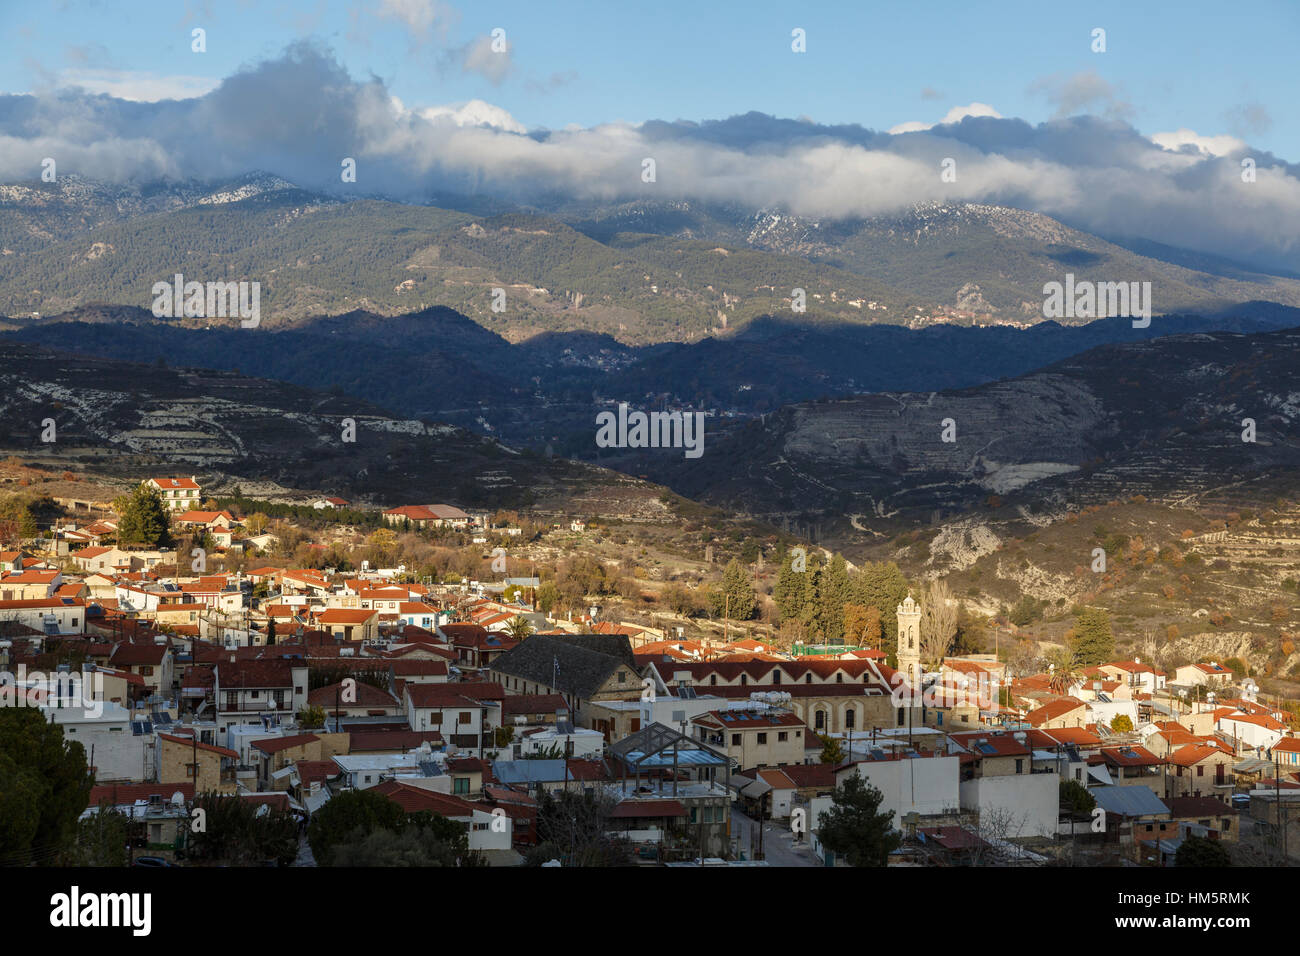 The picturesque village of Omodos with a backdrop of the Troodos Mountains, Cyprus Stock Photo